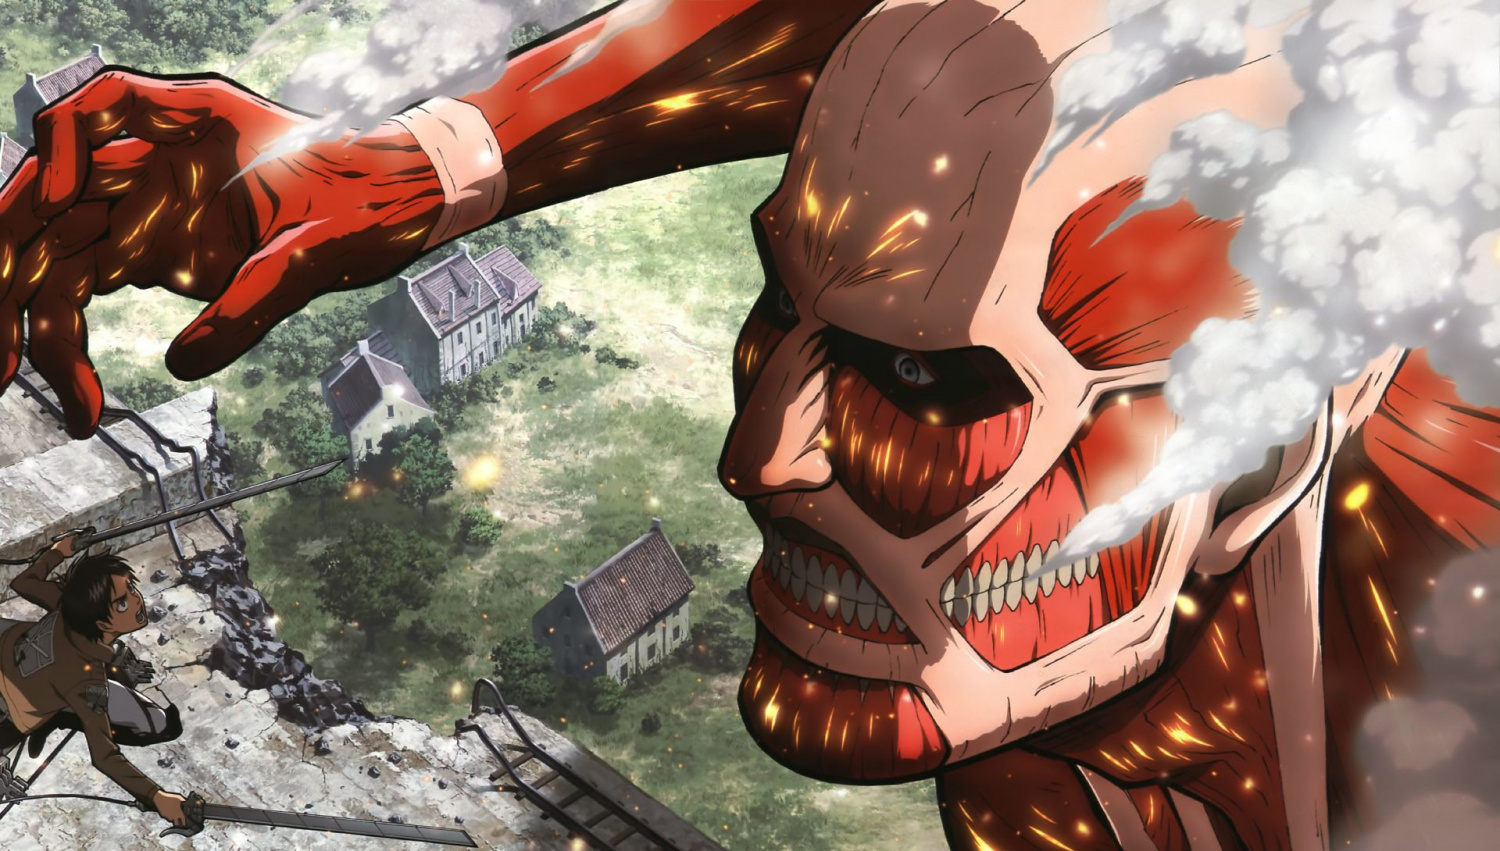 Attack On Titan Chapter 139 Release Date Spoilers Here S When The Leaks Raw Scans May Drop